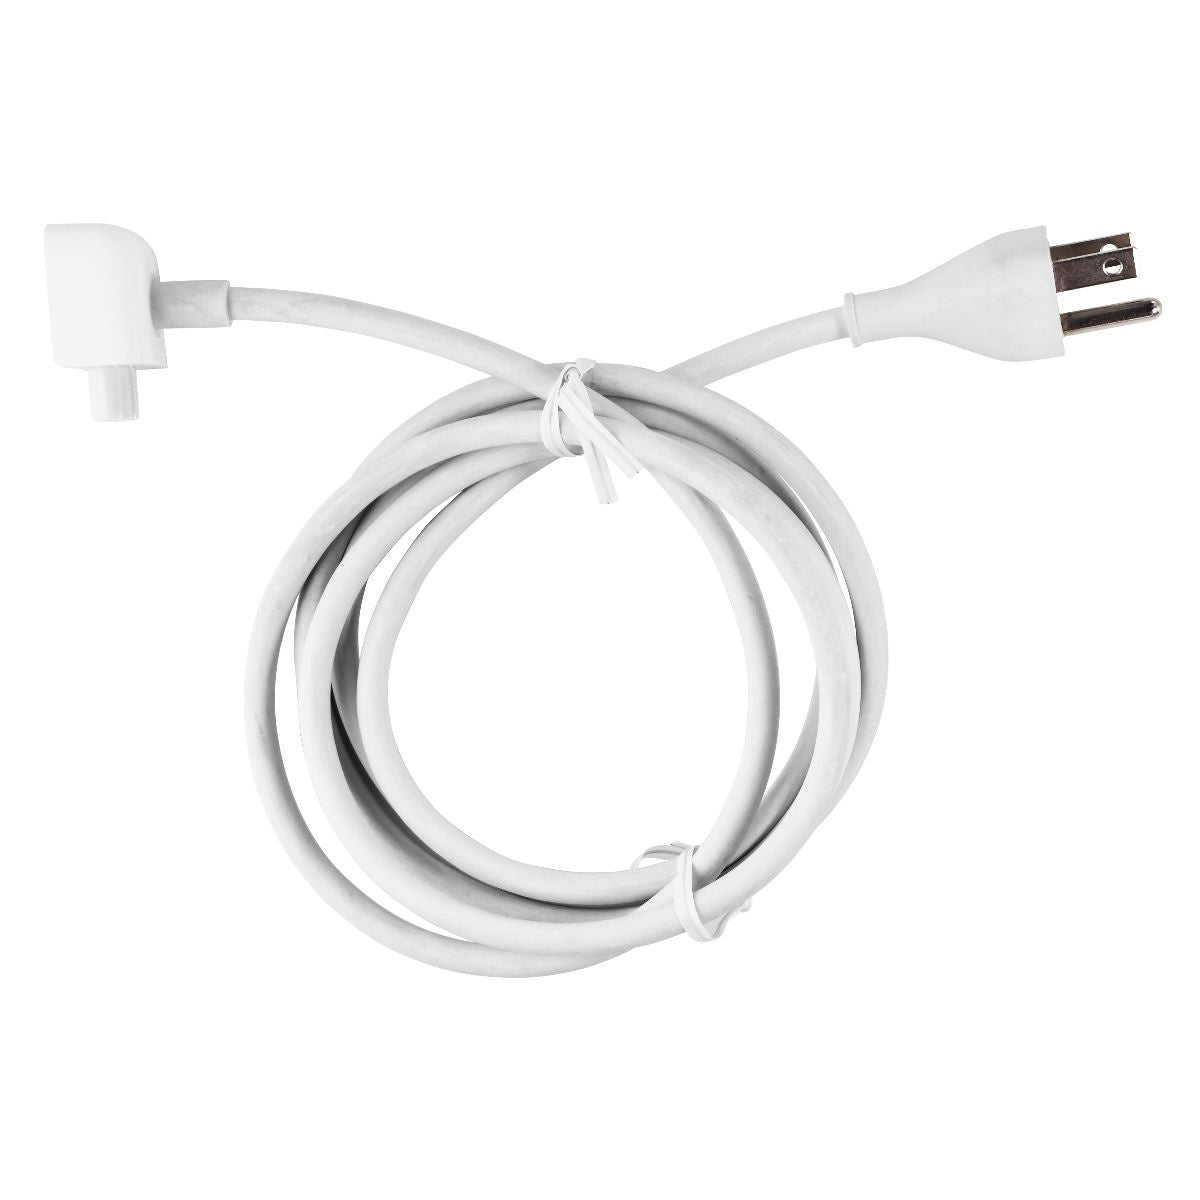 Apple 60W MagSafe Power Adapter w/ Wall Cable & Folding Plug - White (A1344) Computer Accessories - Laptop Power Adapters/Chargers Apple    - Simple Cell Bulk Wholesale Pricing - USA Seller